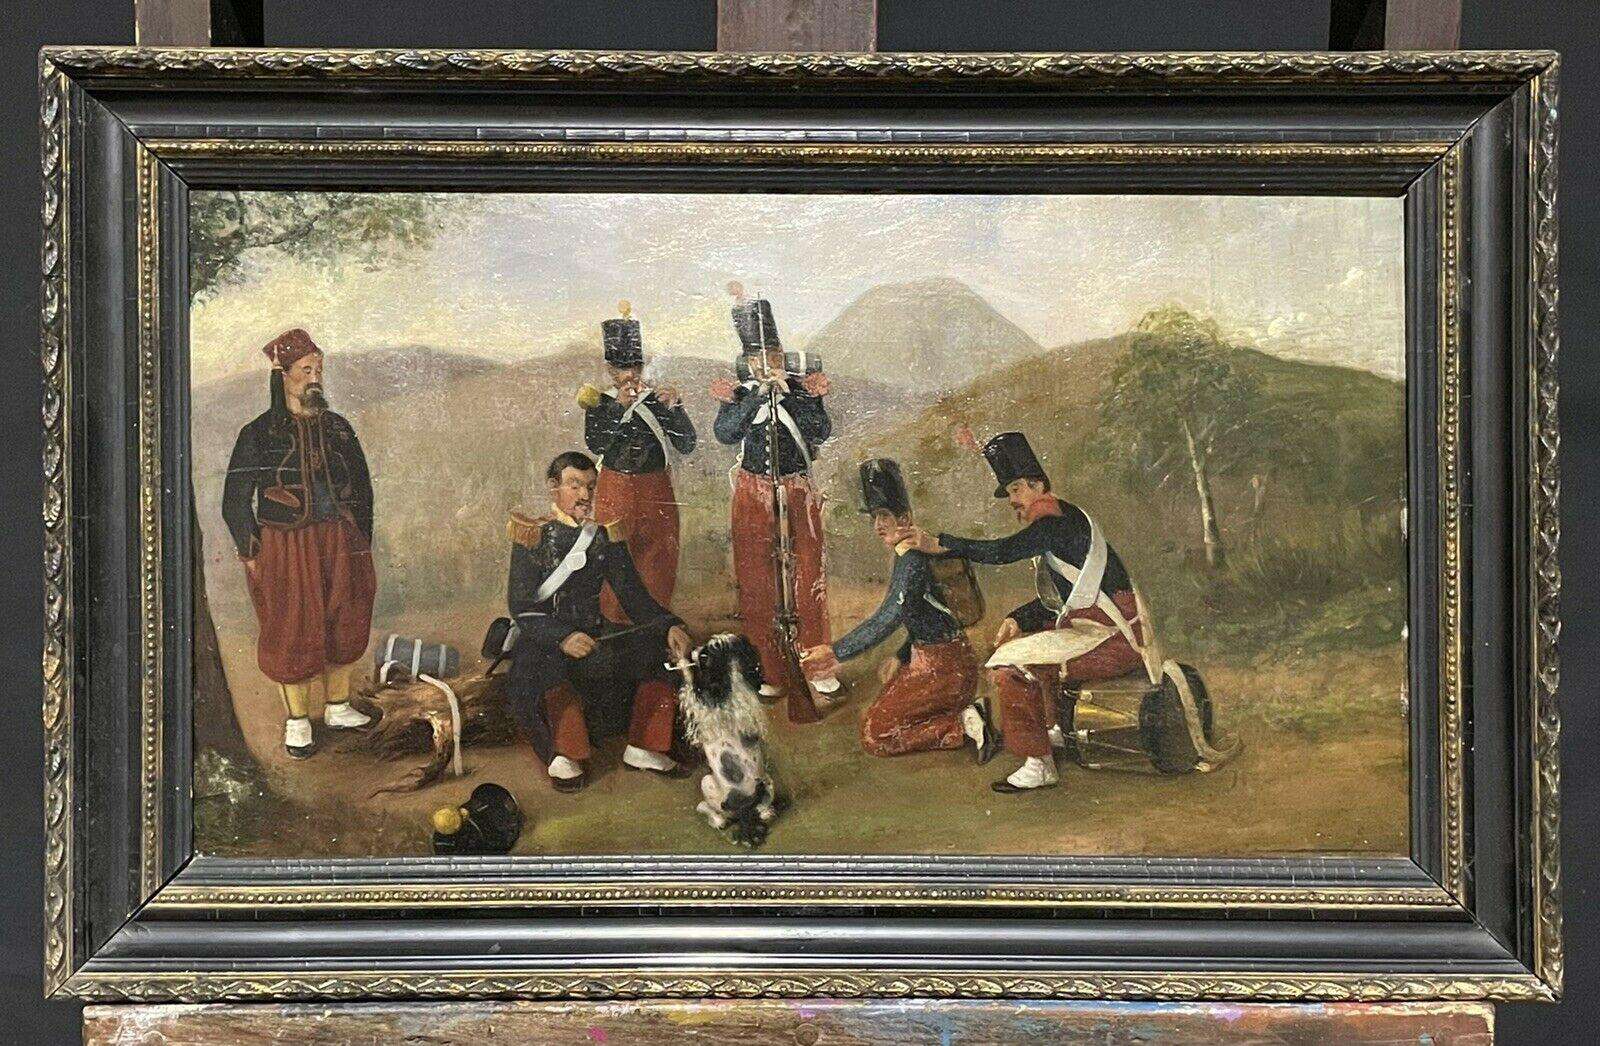 Unknown Figurative Painting - ANTIQUE FRENCH OIL PAINTING 19TH CENTURY SOLDIERS MAKING CAMP - MUSIC & DOG